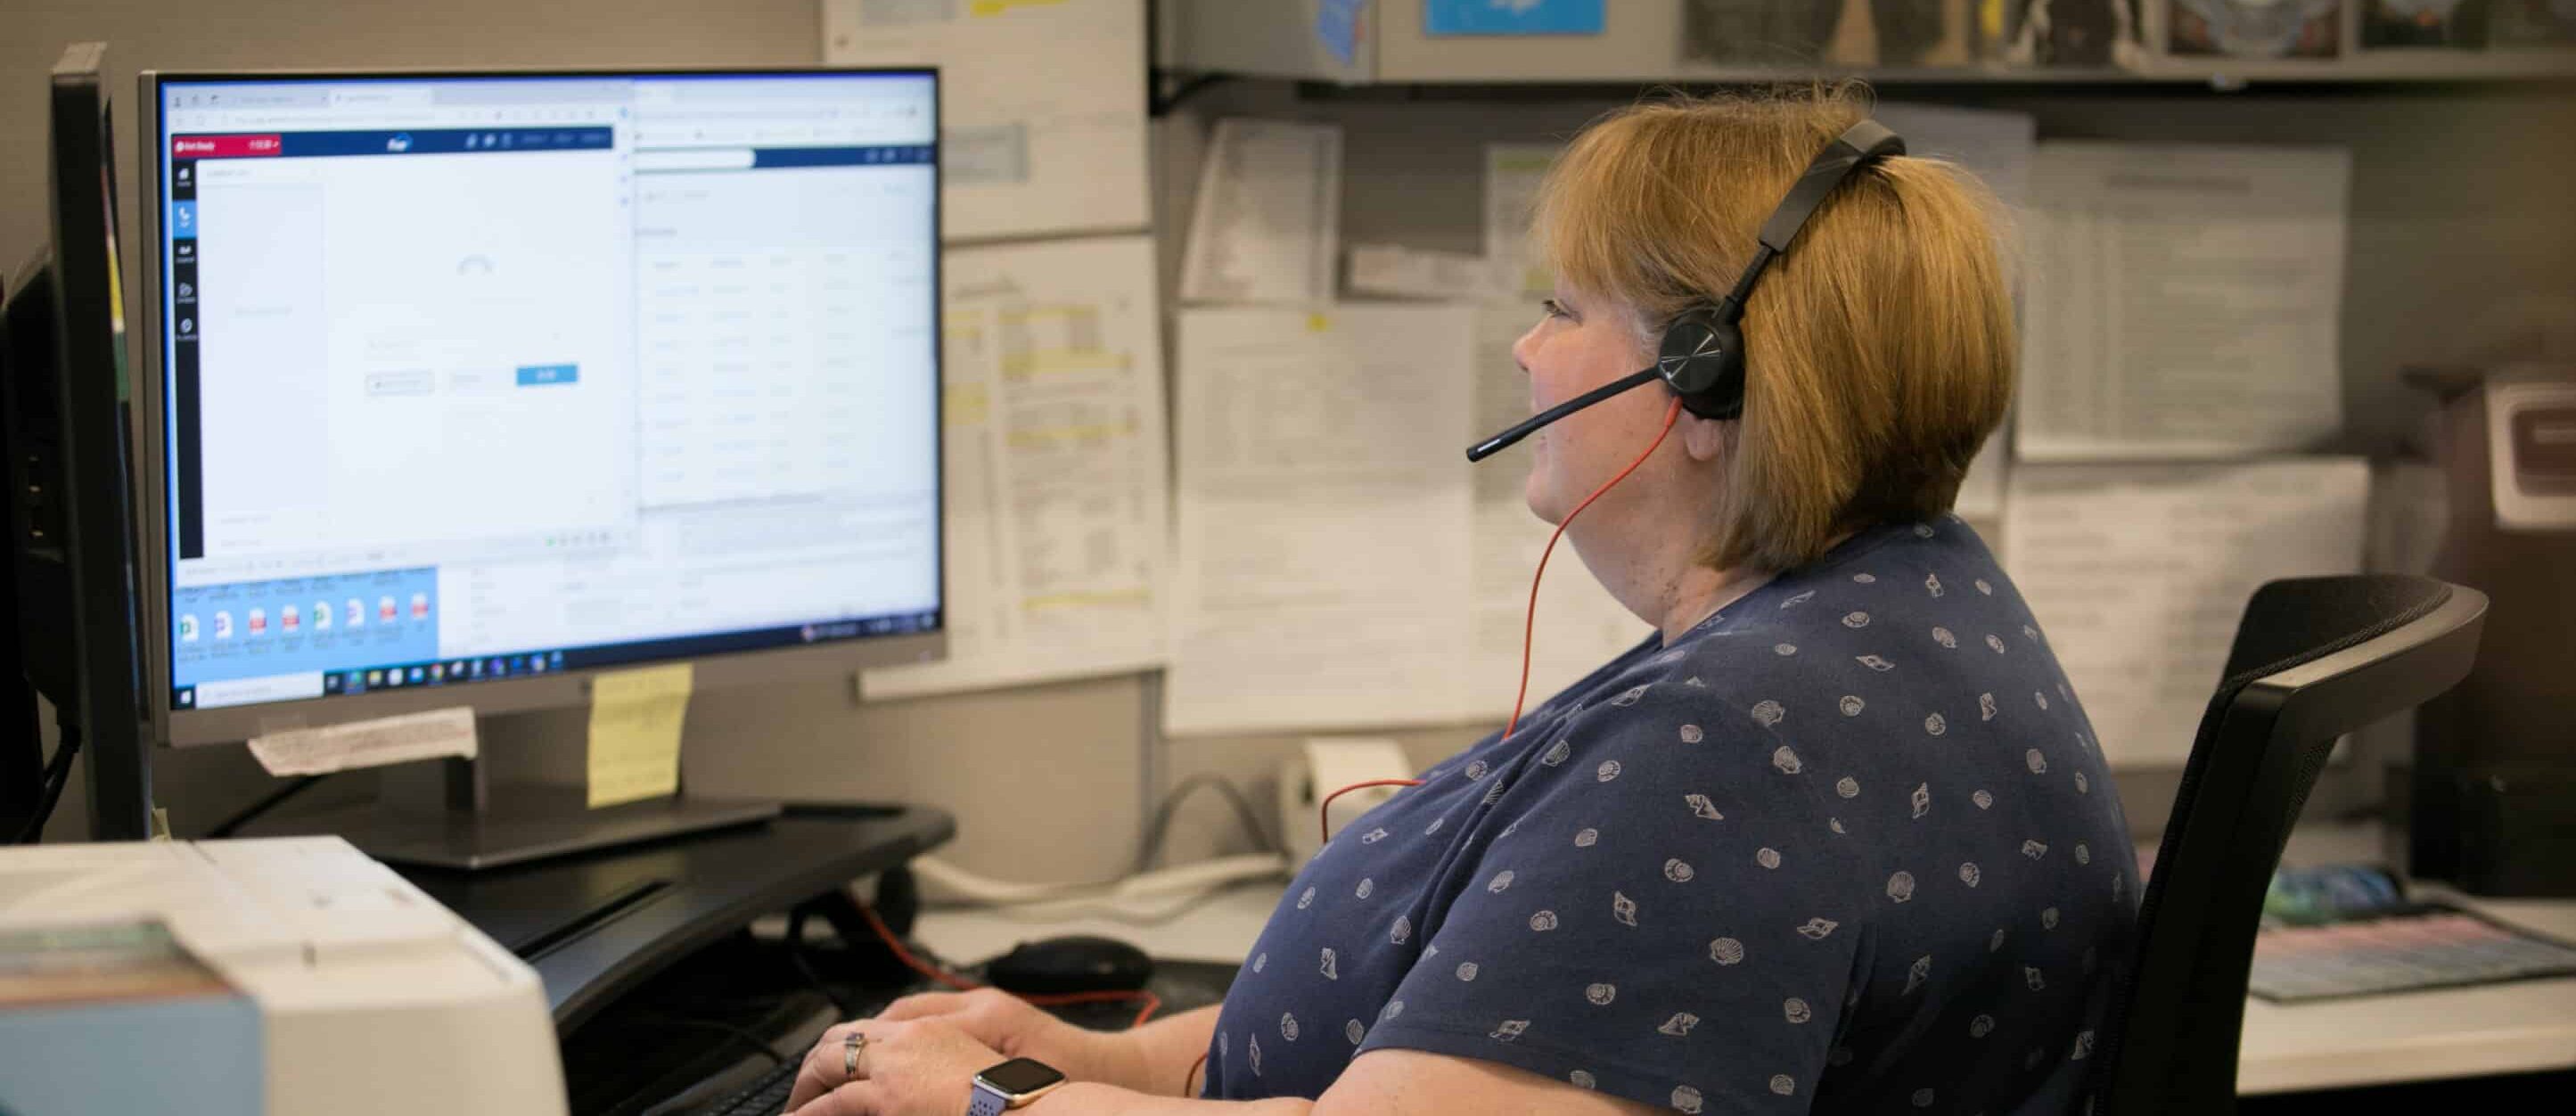 City of Independence support agent helps customer via voice calling and control center at desk in utilities center, wearing a Poly headset.